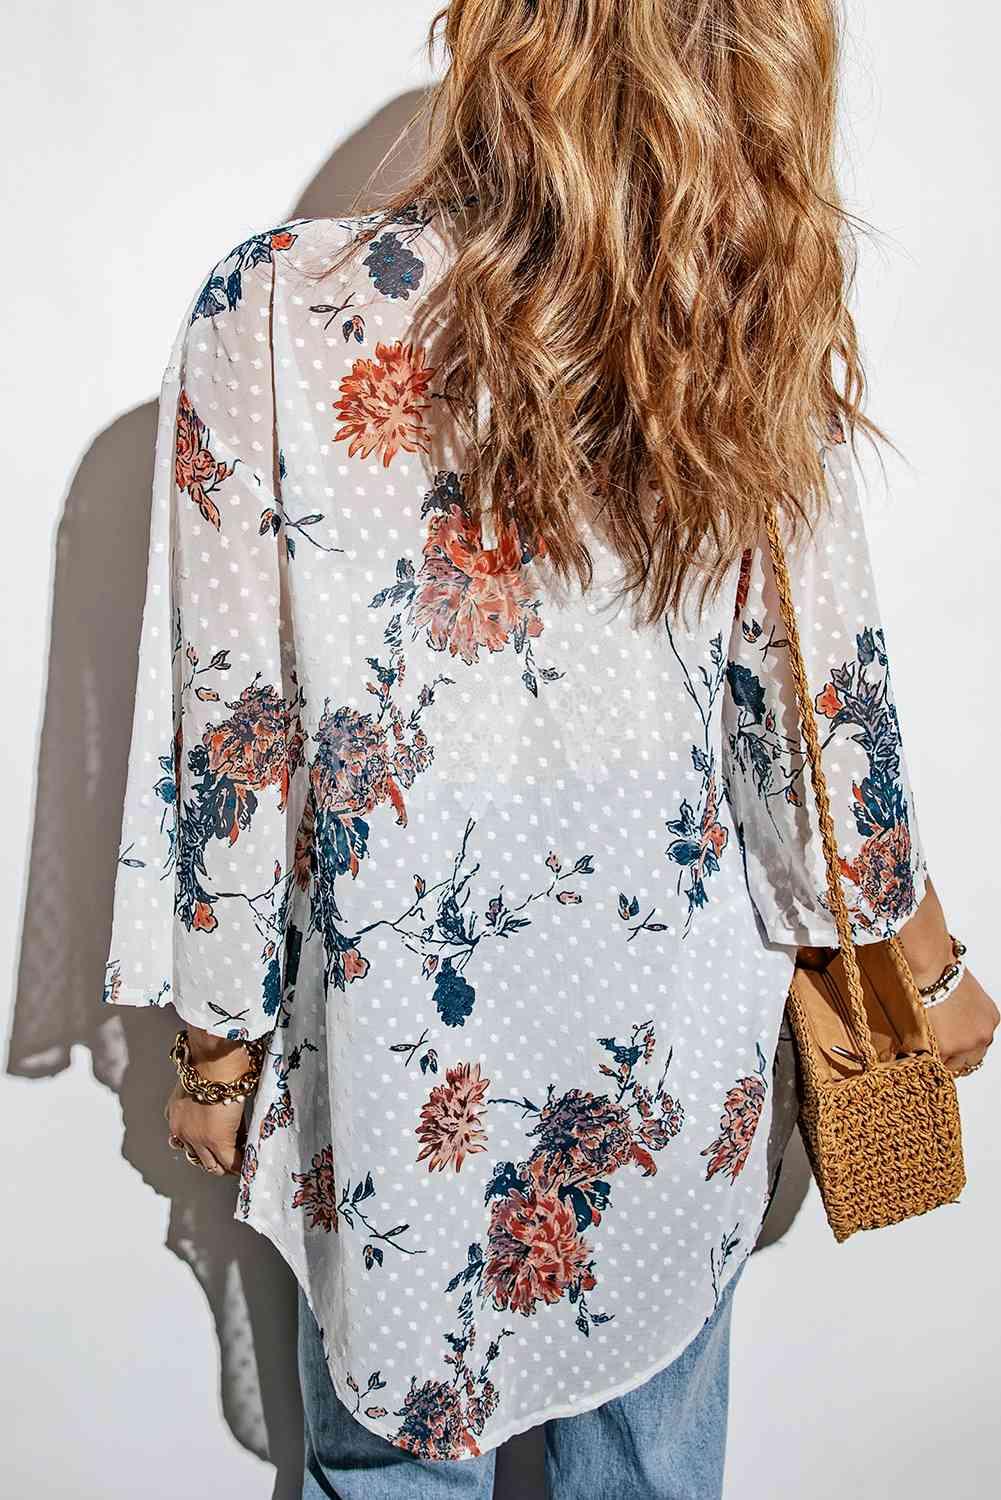 a woman with long hair wearing a floral blouse